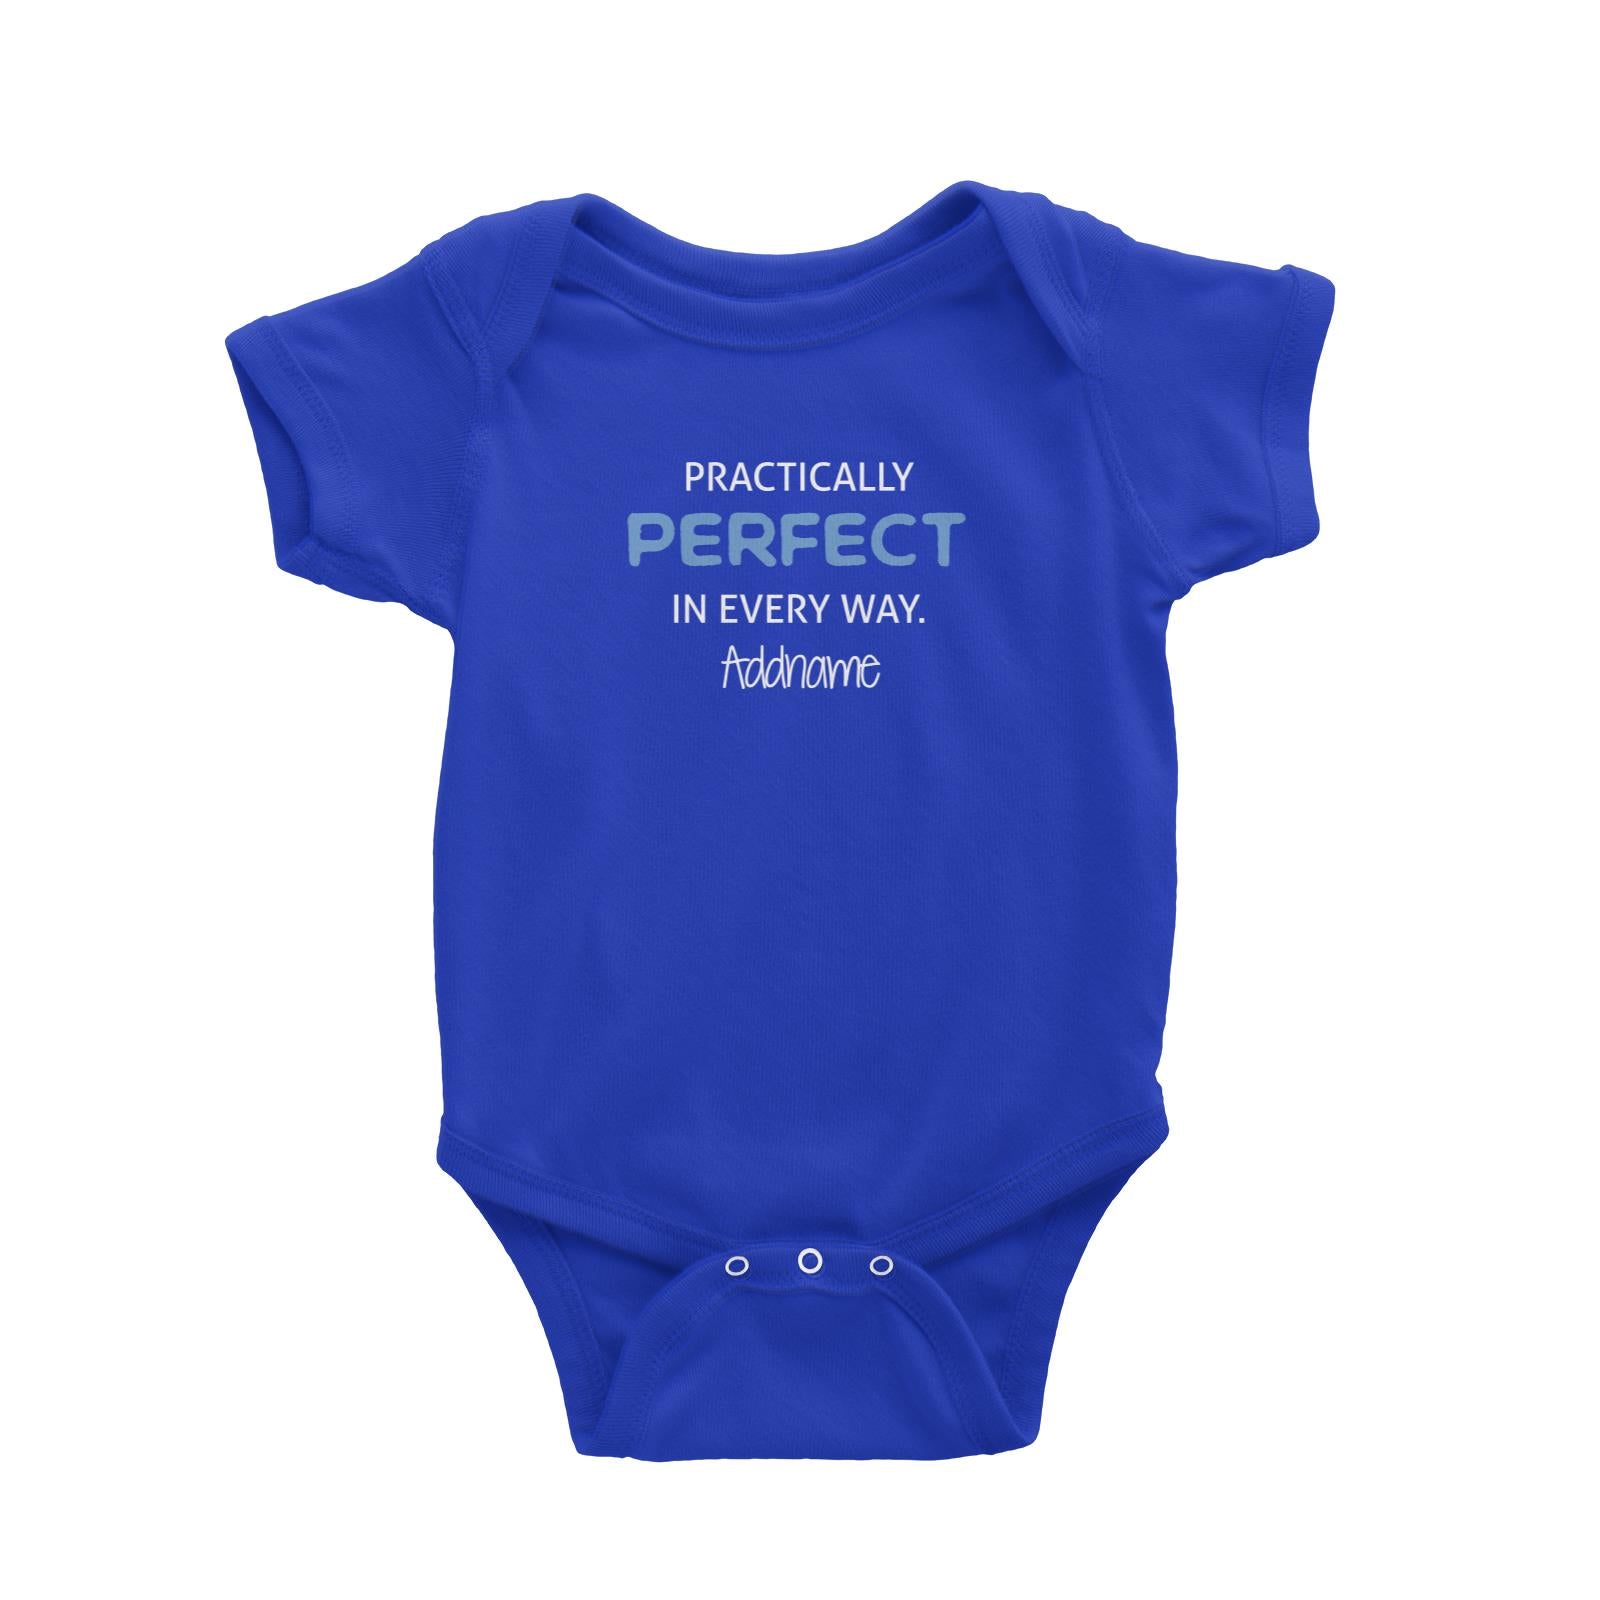 Practically Perfect in Every Way Boys Addname Baby Romper